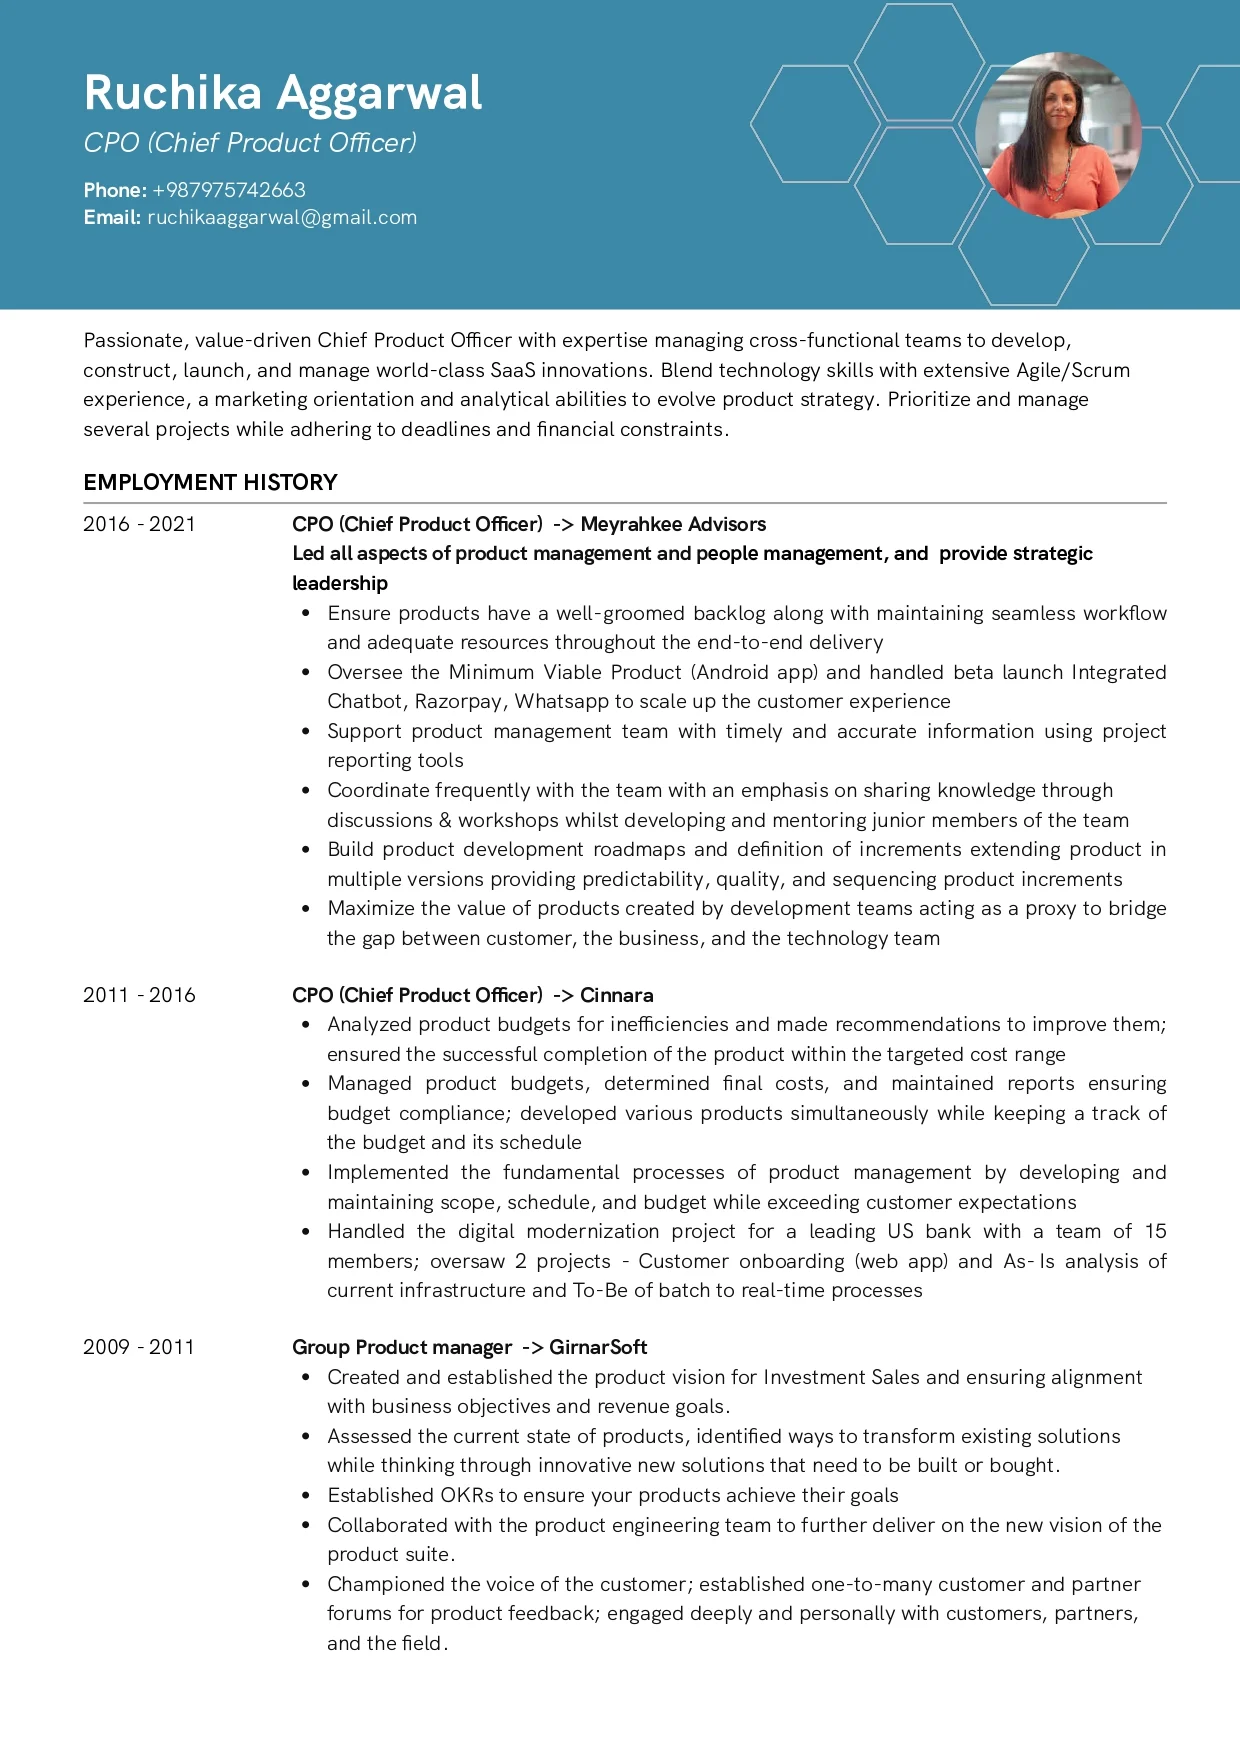 Sample Resume of Chief Product Officer | Free Resume Templates & Samples on Resumod.co